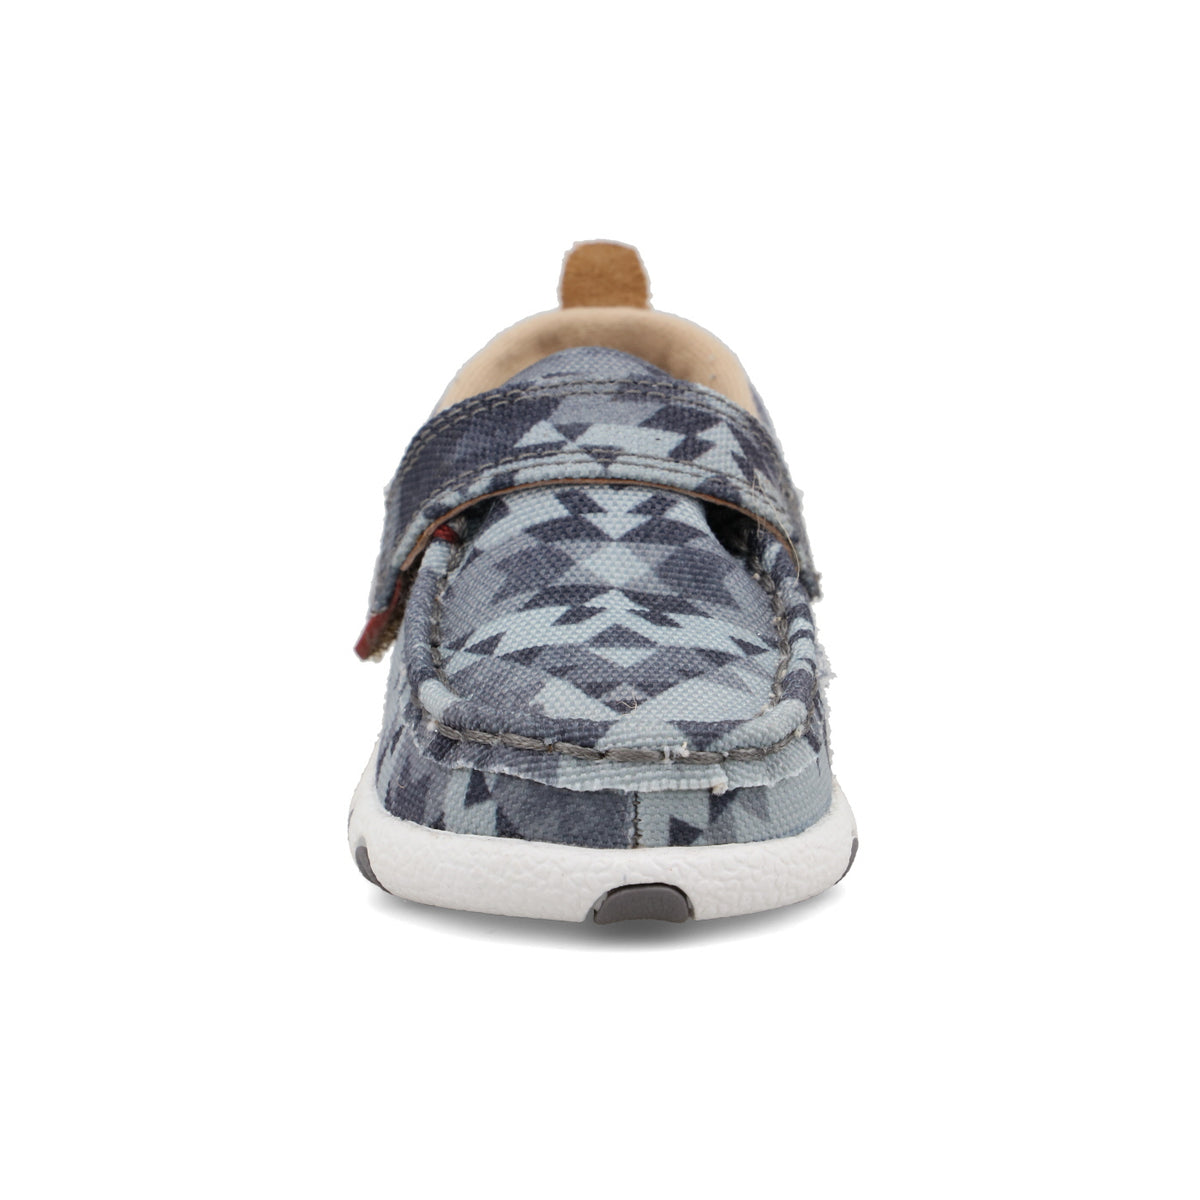 Hooey by Twisted X Infant & Toddler Grey Aztec Driving Moc